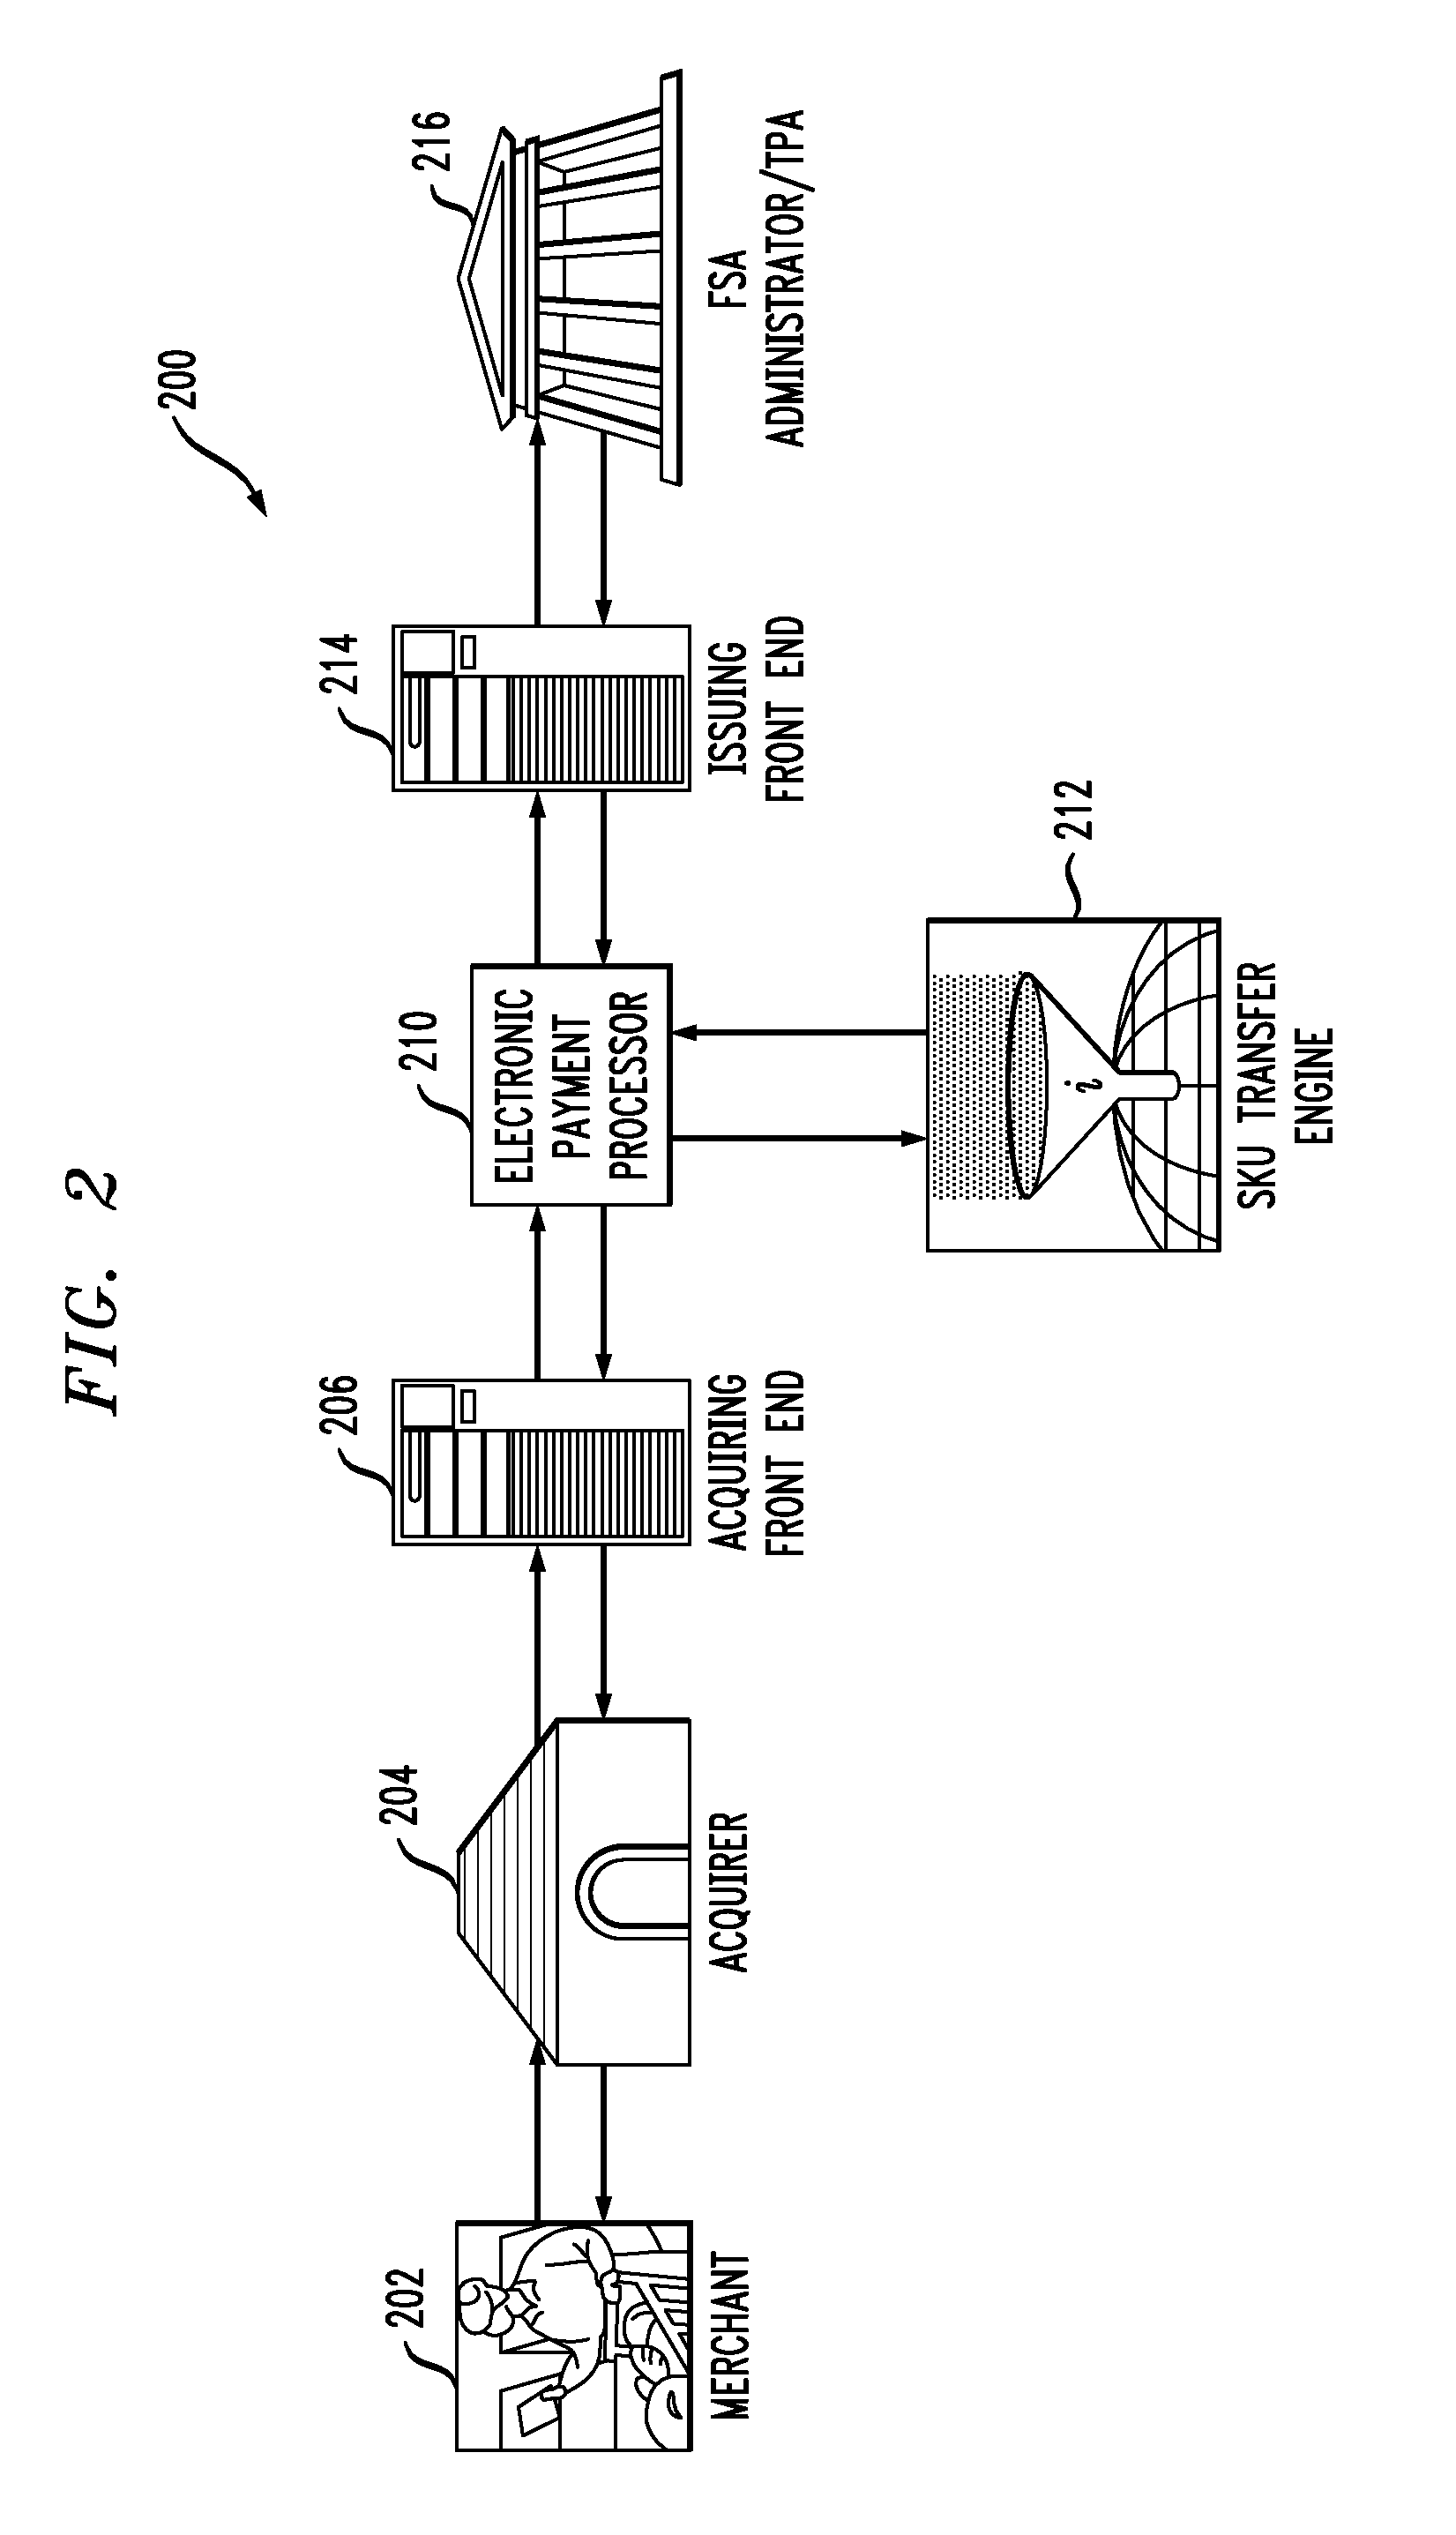 Method and system for enabling item-level approval of payment card